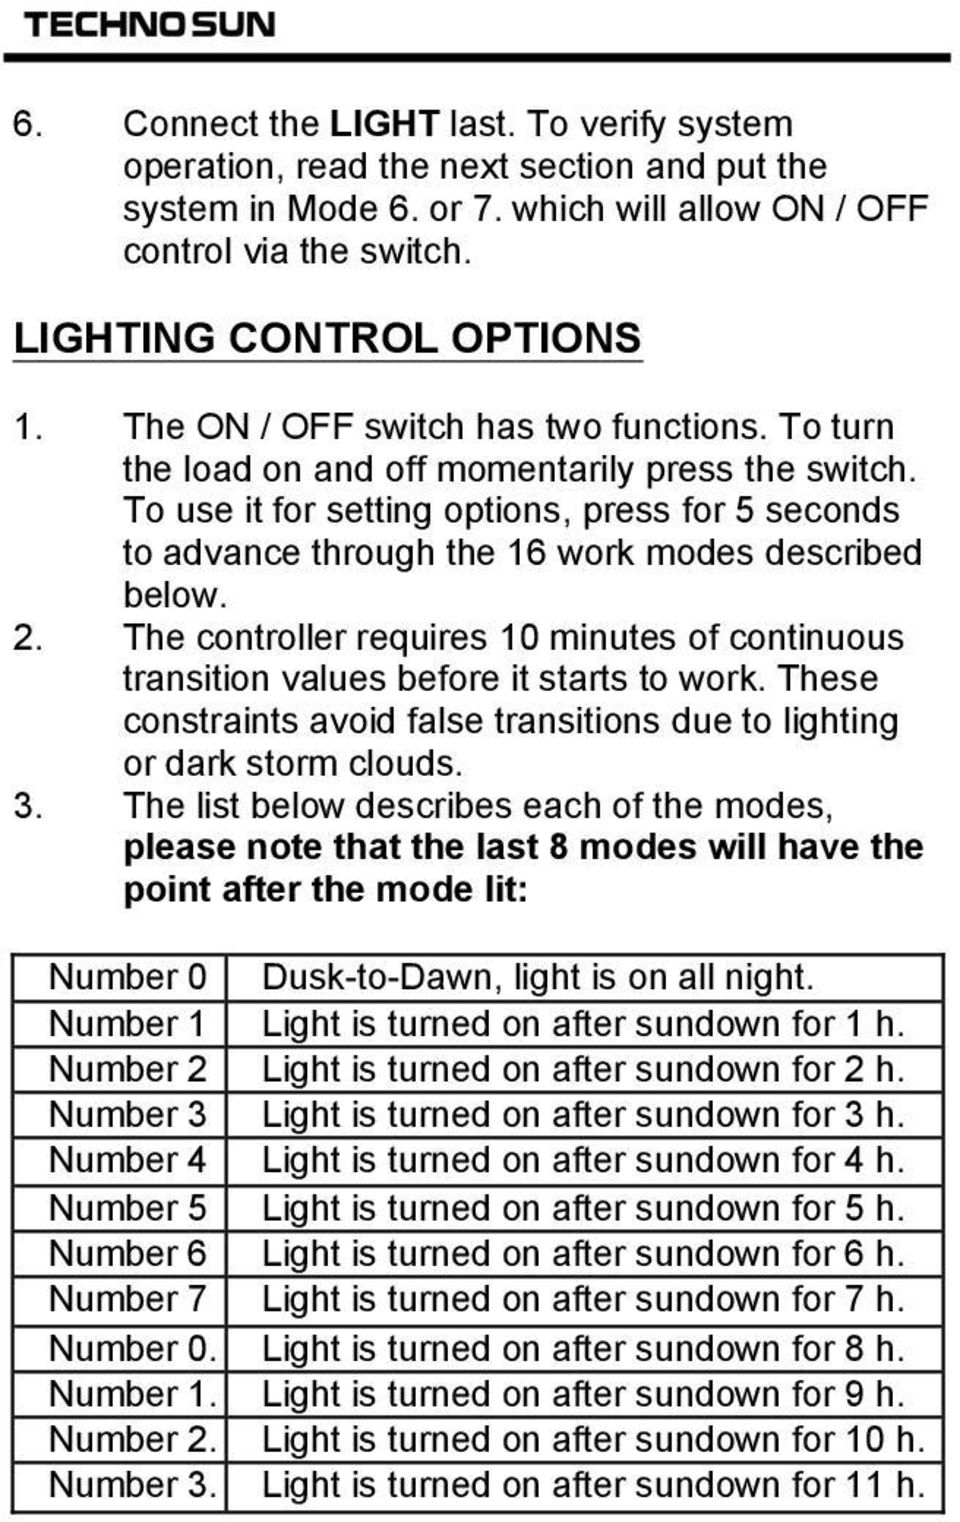 To use it for setting options, press for 5 seconds to advance through the 16 work modes described below. 2. The controller requires 10 minutes of continuous transition values before it starts to work.